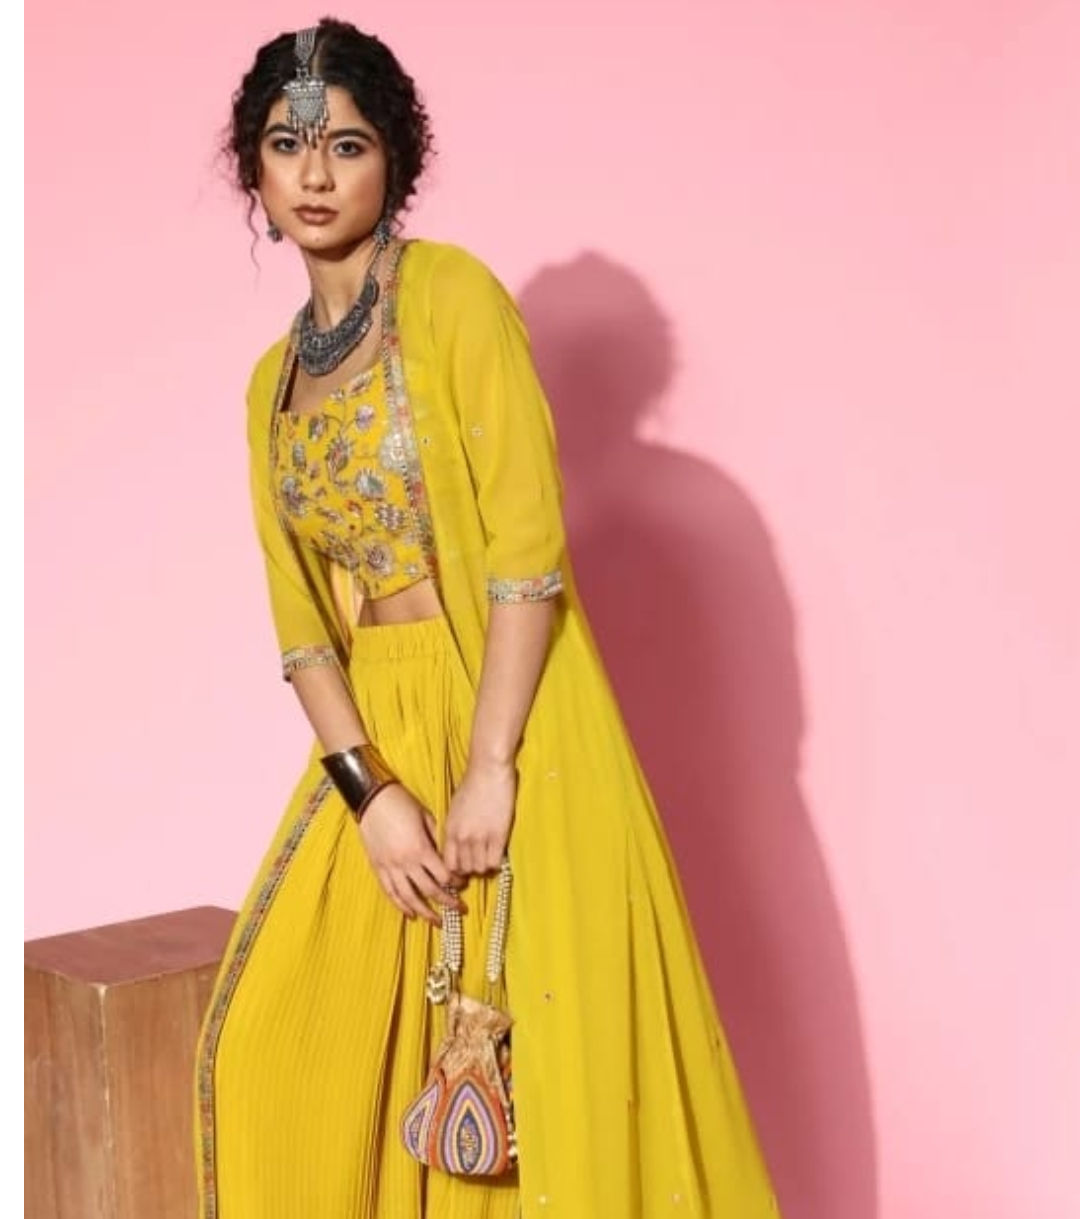 kvsfab Women Ethnic Jacket, Top and Palazzo Set - Buy kvsfab Women Ethnic Jacket, Top and Palazzo Set Online at Best Prices in India | Flipkart.com